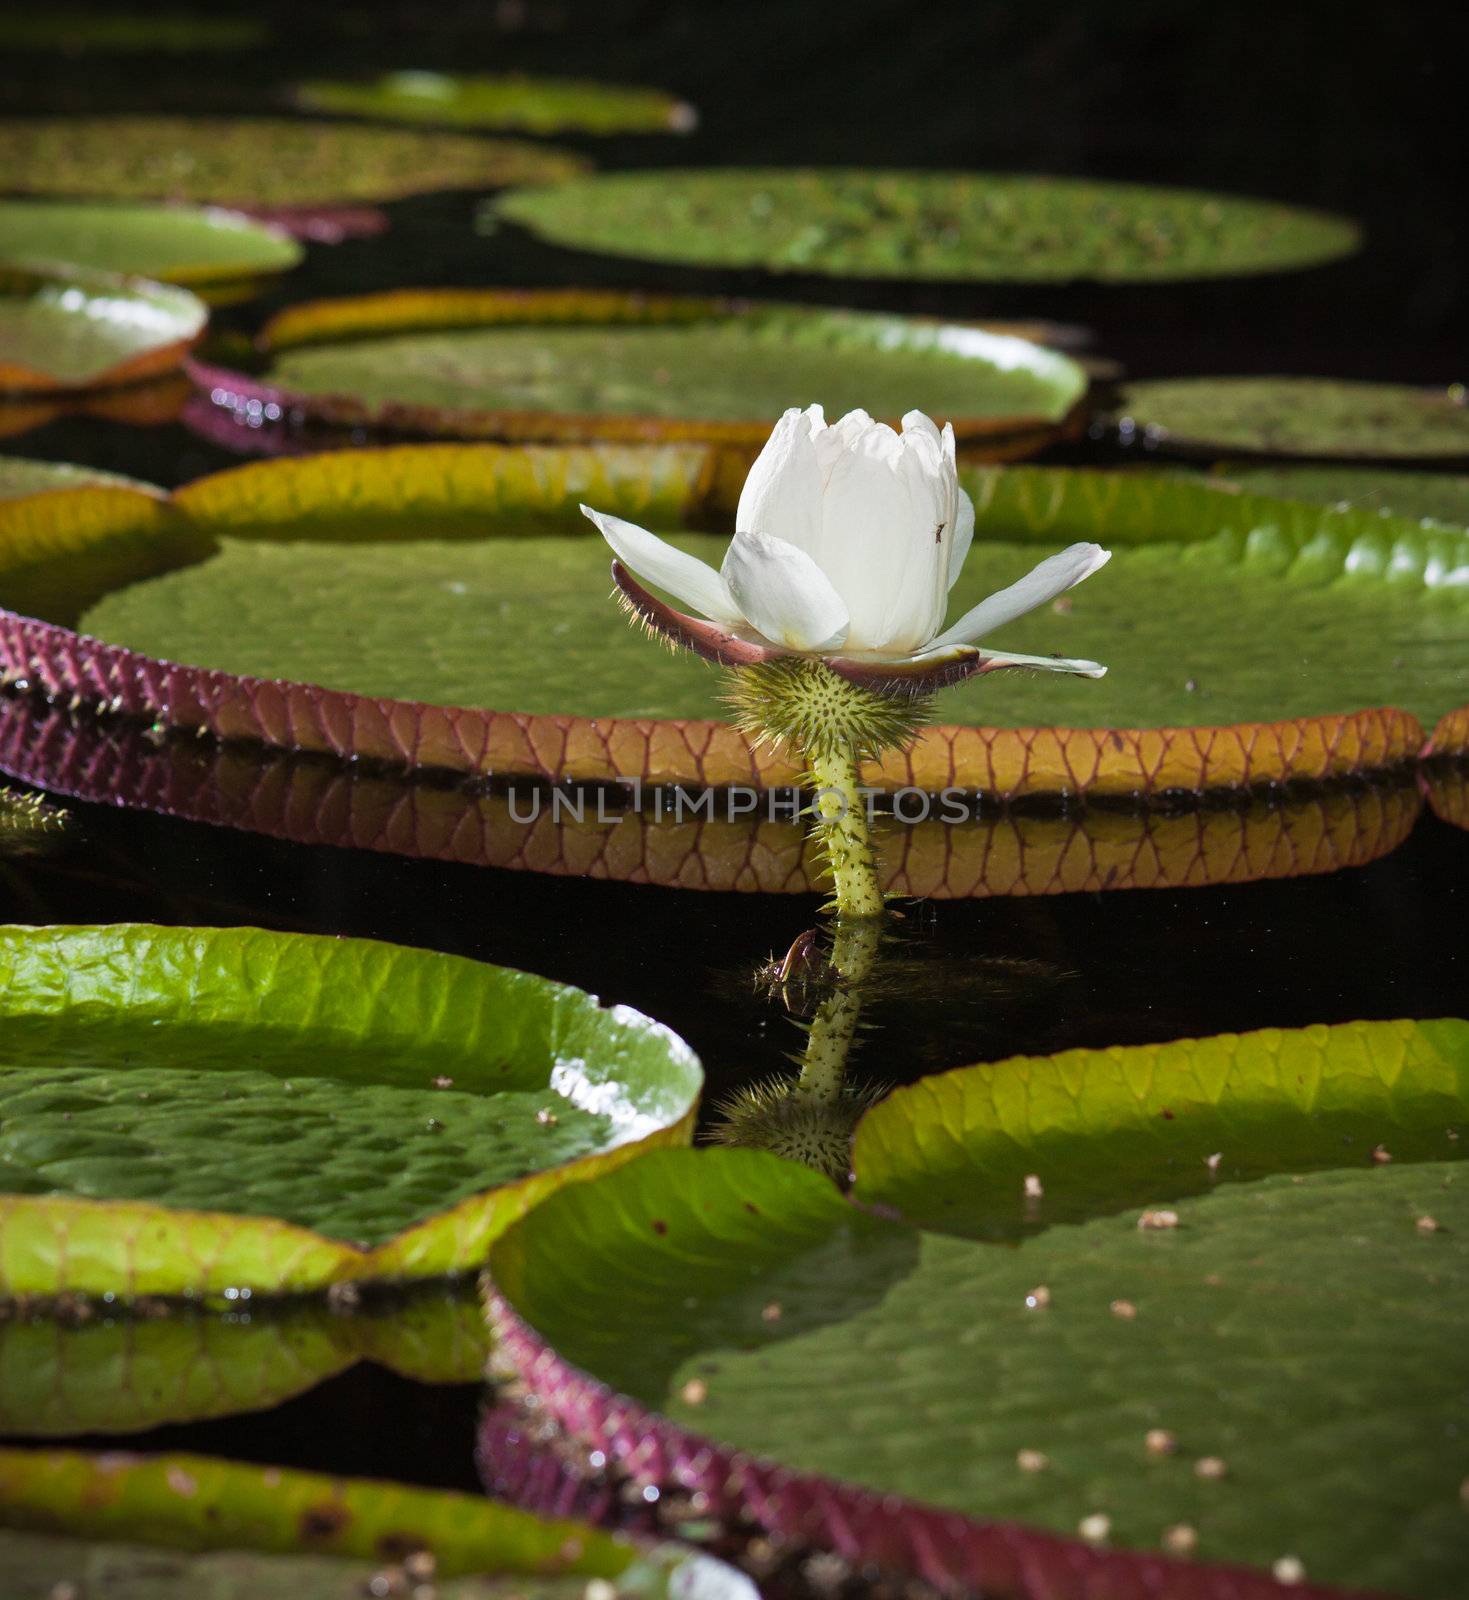 Close-up of the Giant water lily (Vicoria amazonica) flower.